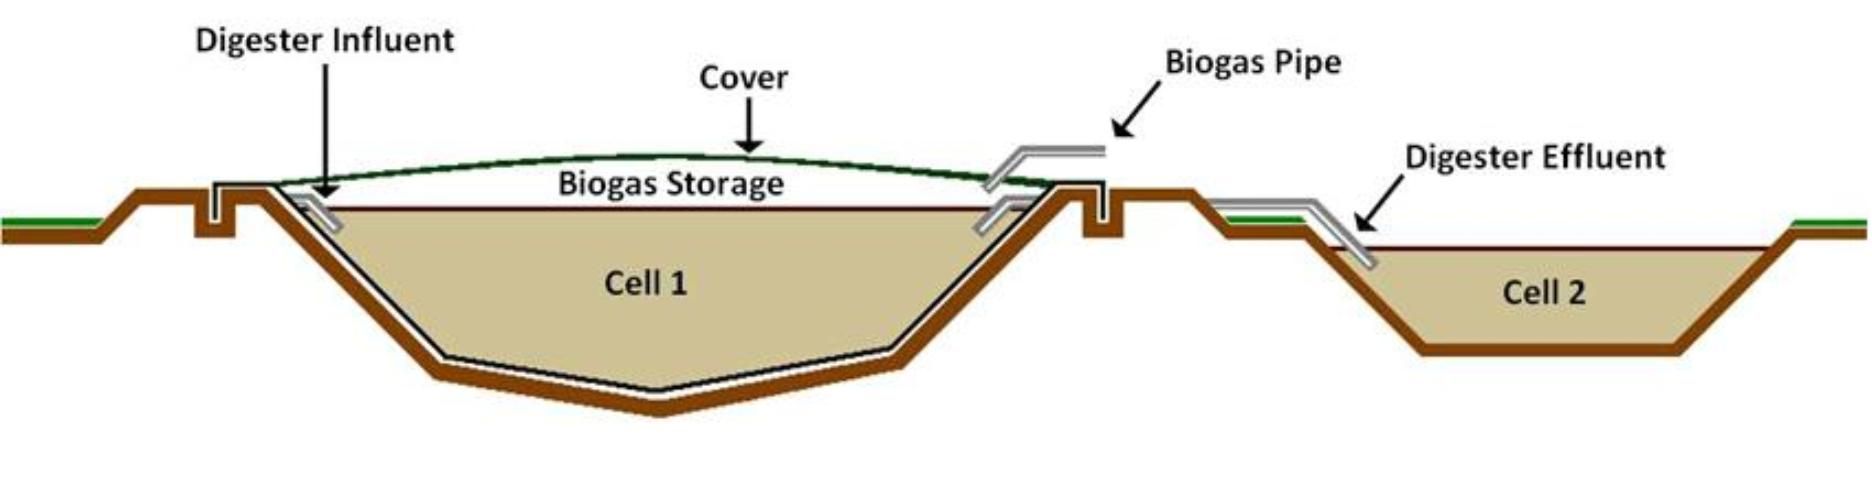 Figure 1. Schematic of a covered anaerobic lagoon digester.